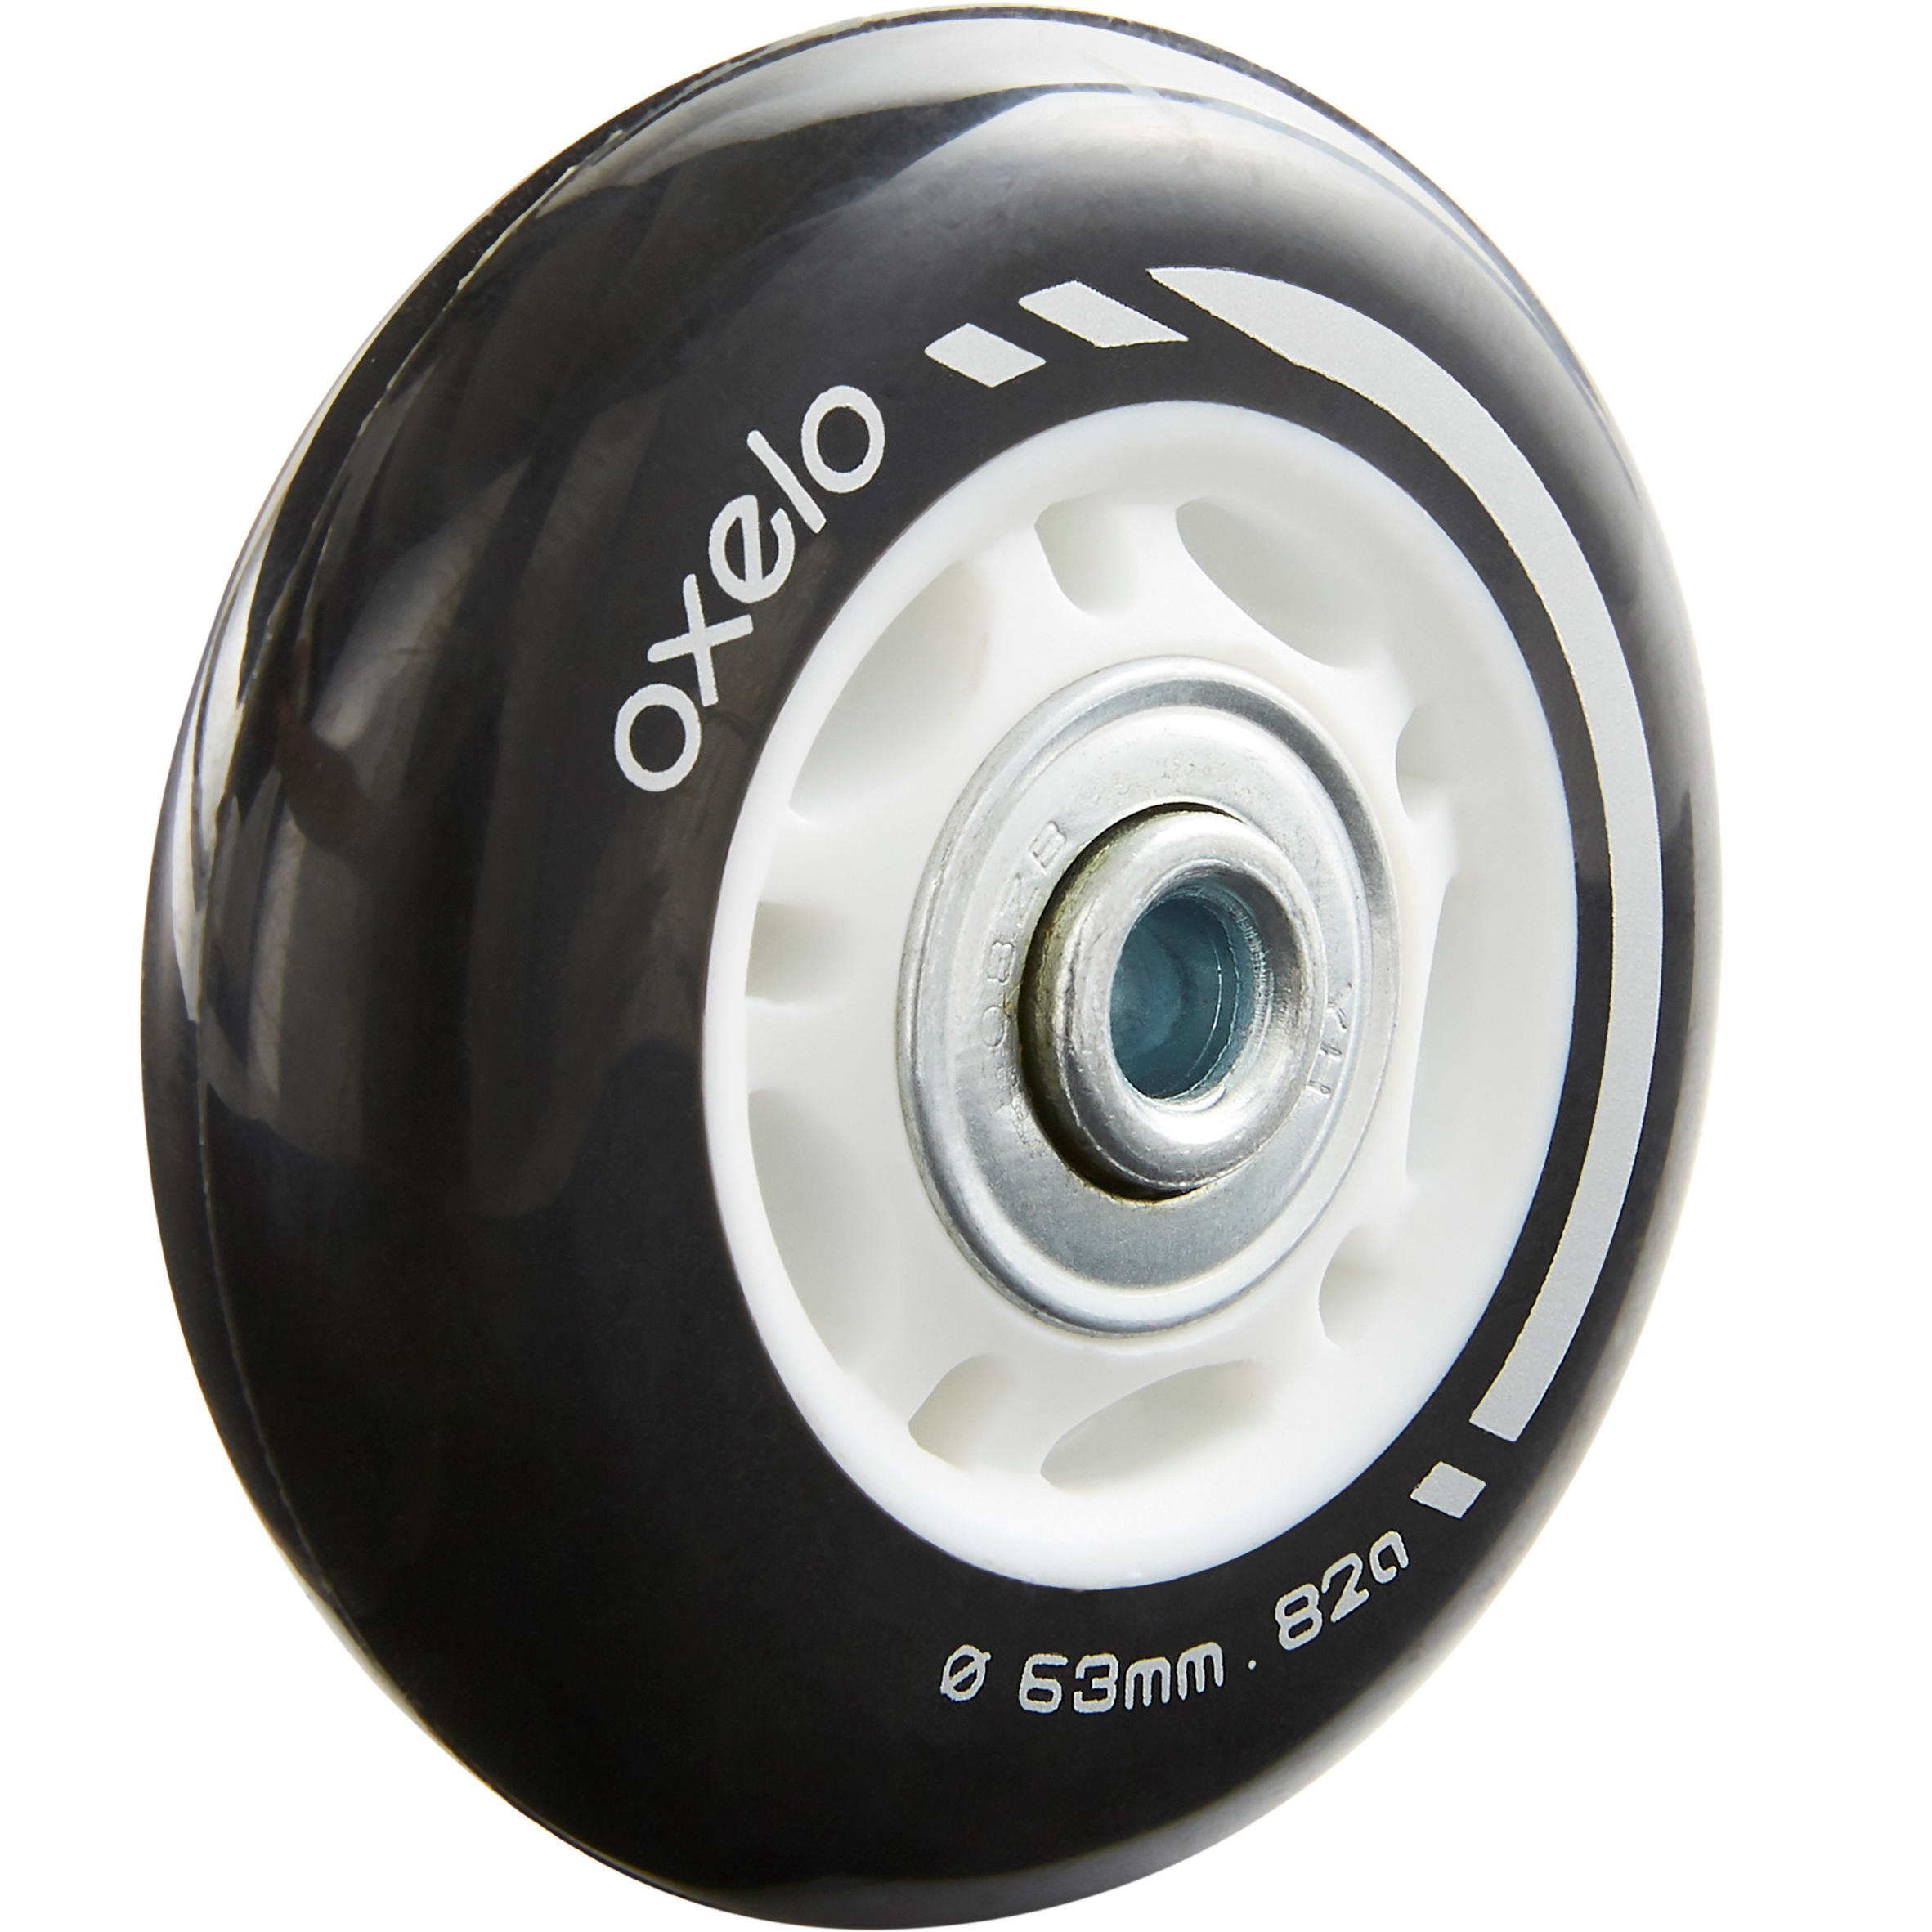 Inline Skating Wheels 63mm / 82A with Bearings 4-Pack - Kids - OXELO